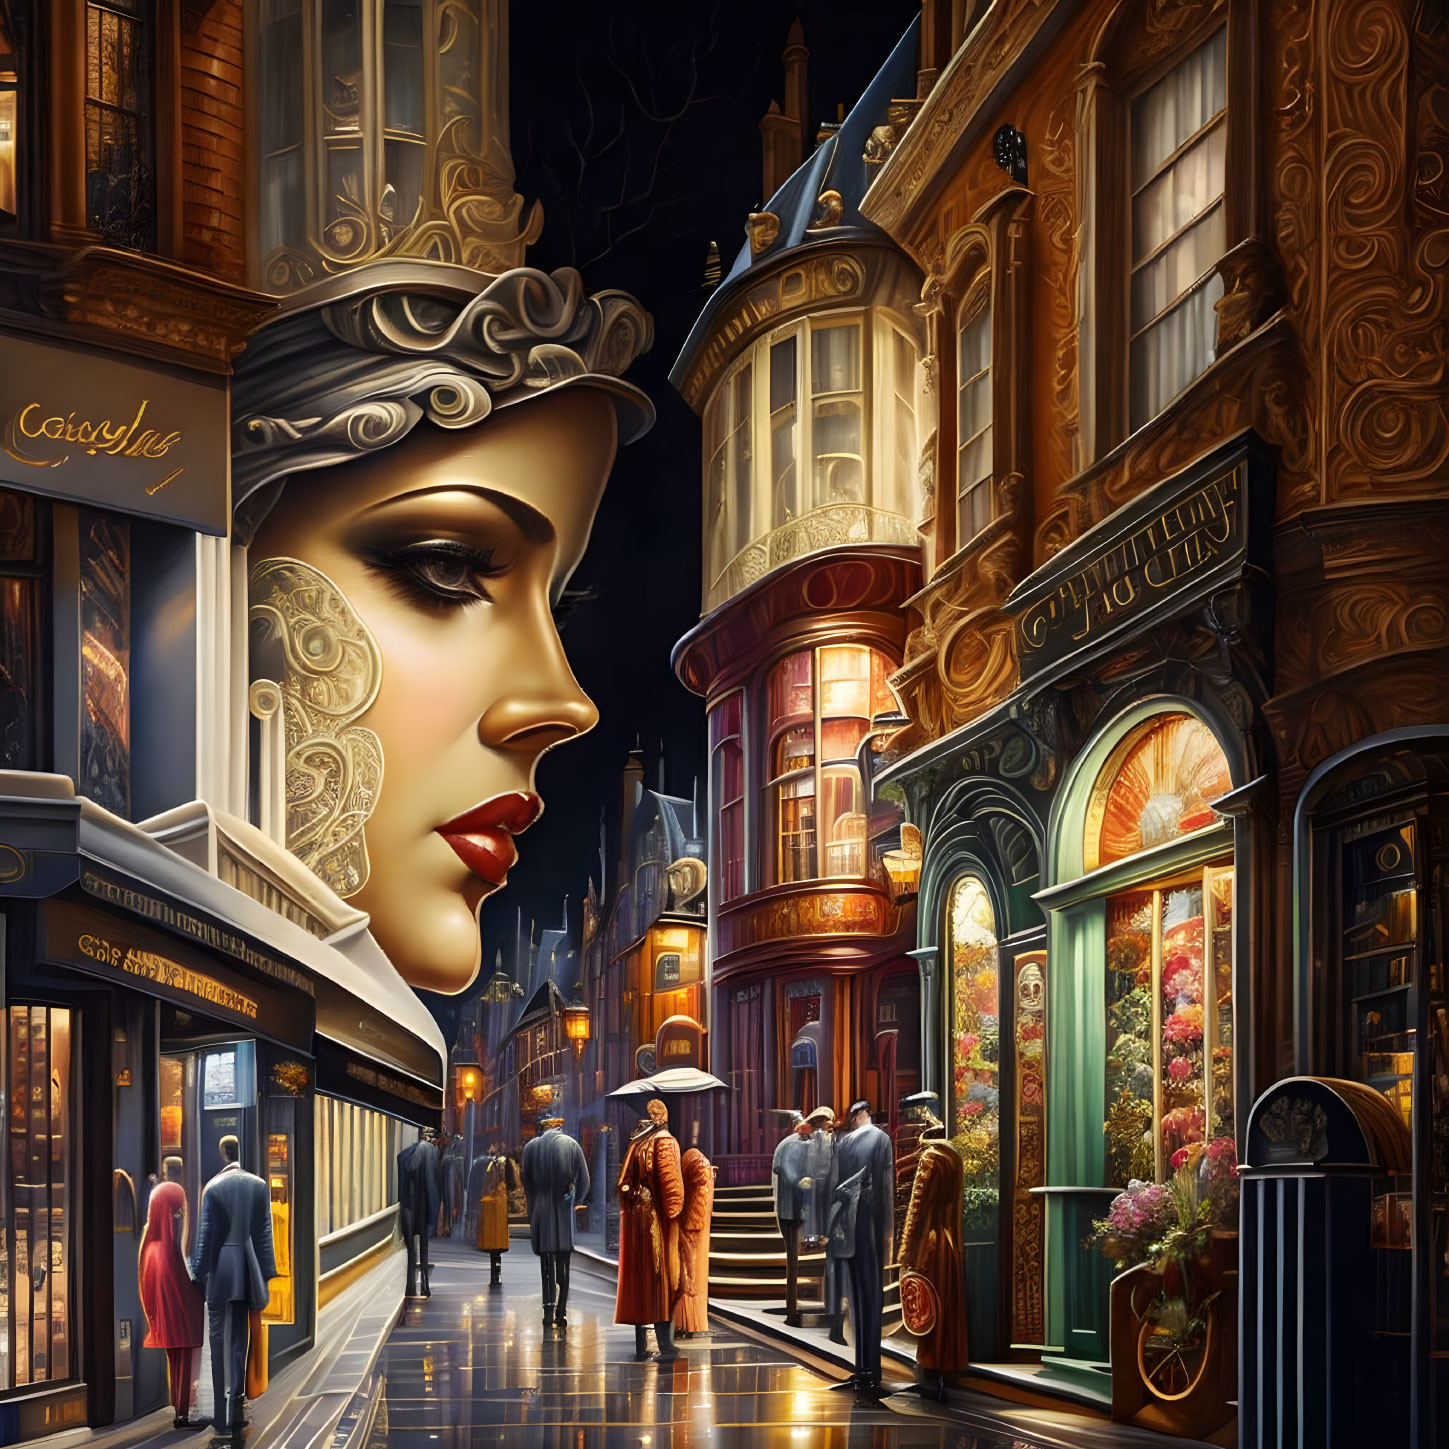 Colorful artwork: Woman's profile merges with cityscape at night